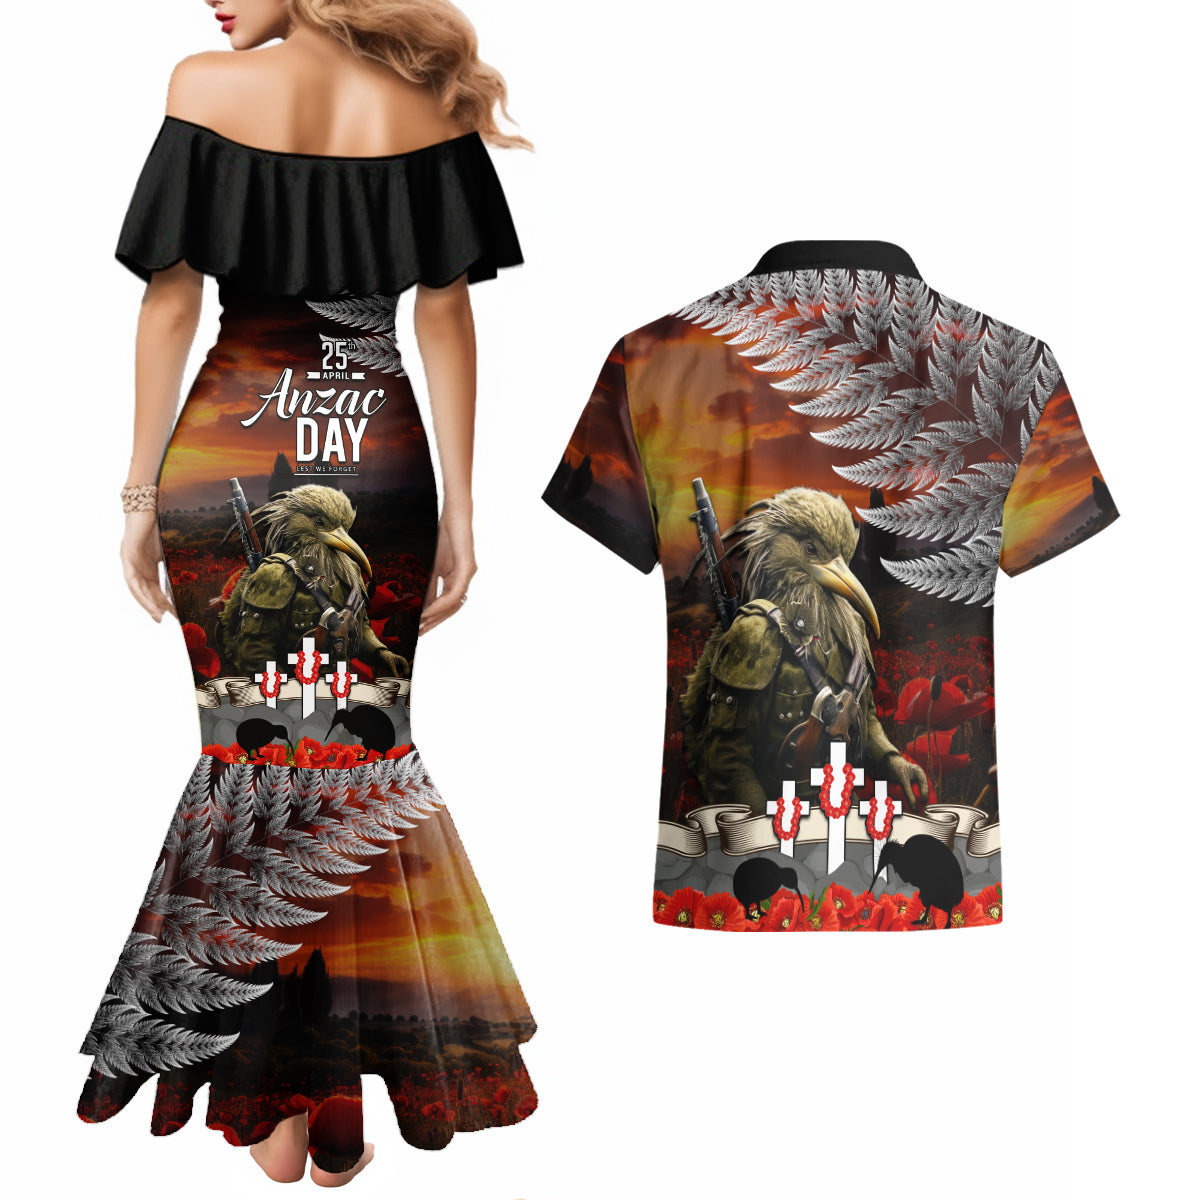 New Zealand ANZAC Day Couples Matching Mermaid Dress and Hawaiian Shirt The Ode of Remembrance and Silver Fern